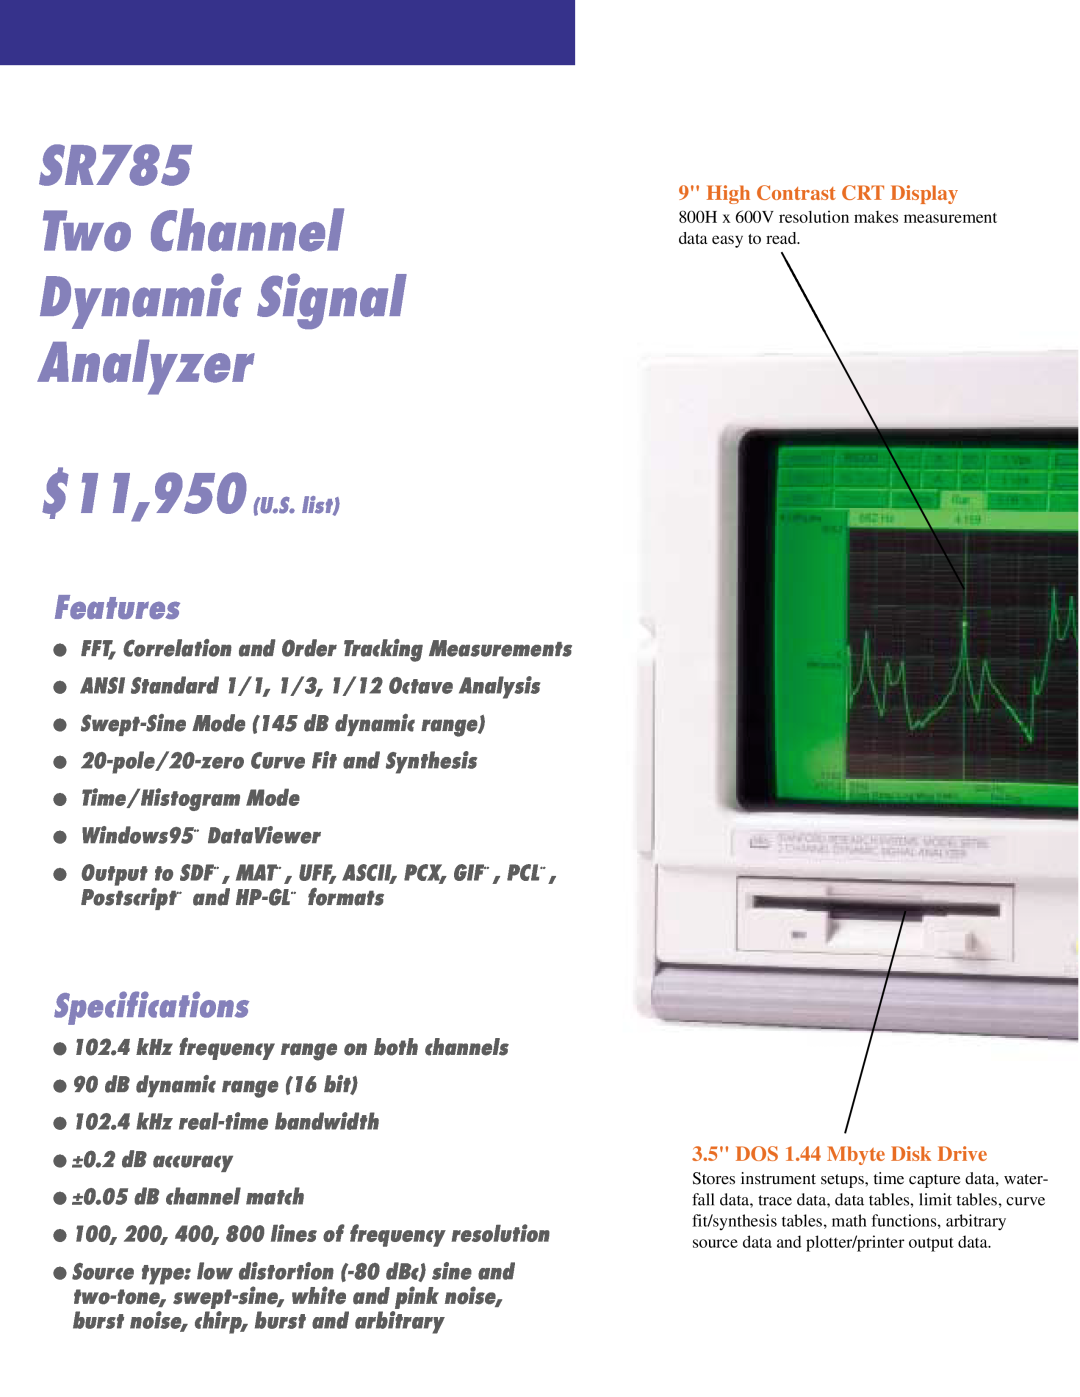 SRS Labs SR785 manual Features, Specifications, High Contrast CRT Display, DOS 1.44 Mbyte Disk Drive 